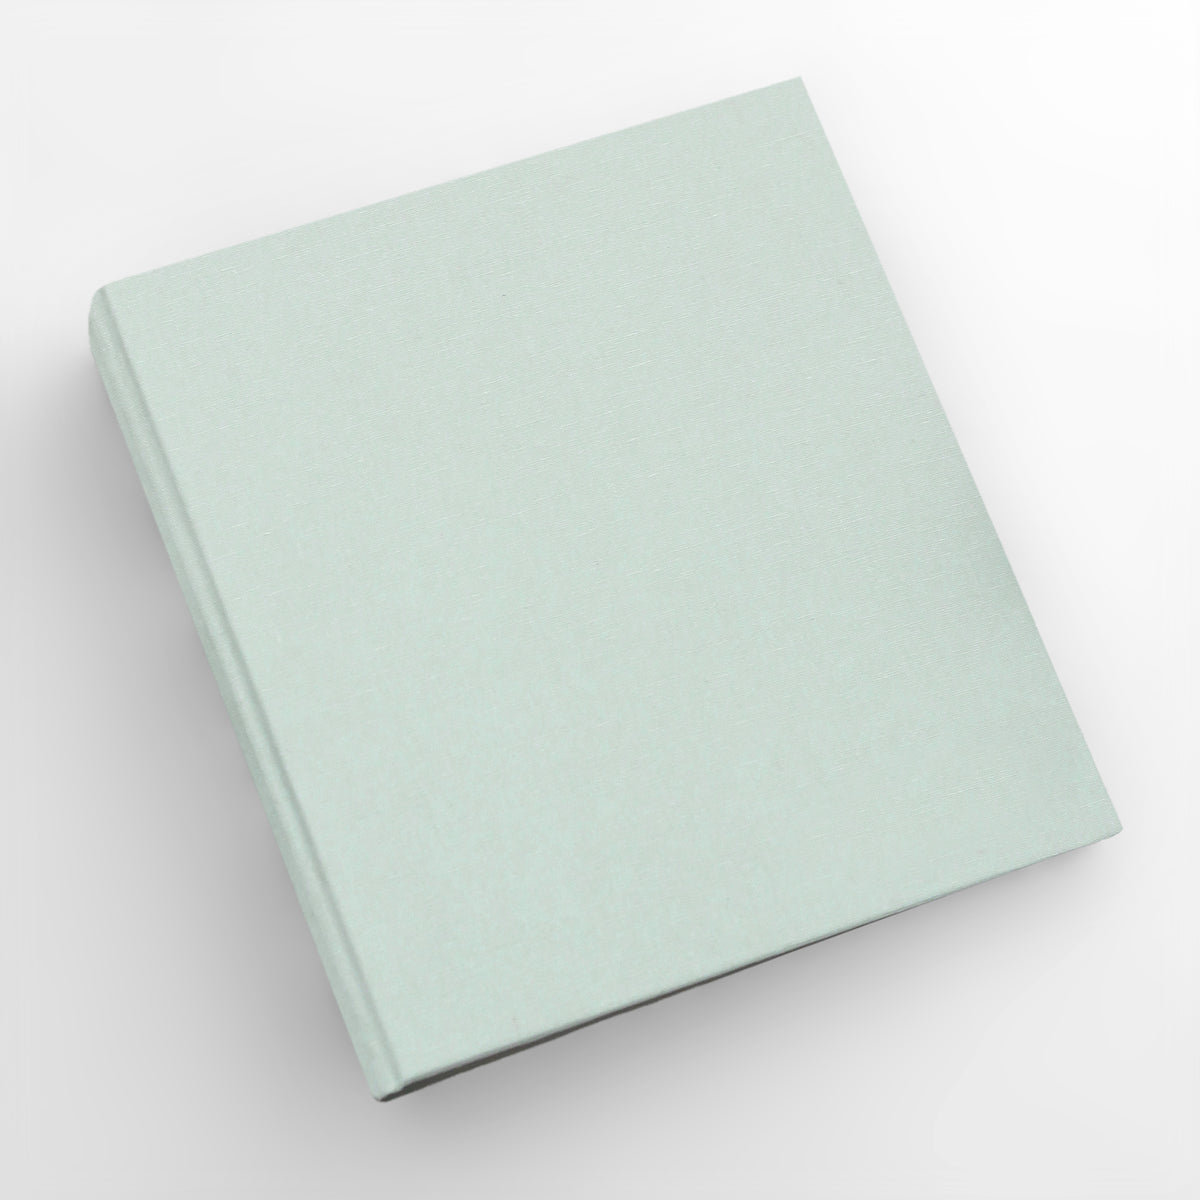 Large Photo Binder For 8x10 Photos | Cover: Pastel Blue Cotton | Available Personalized